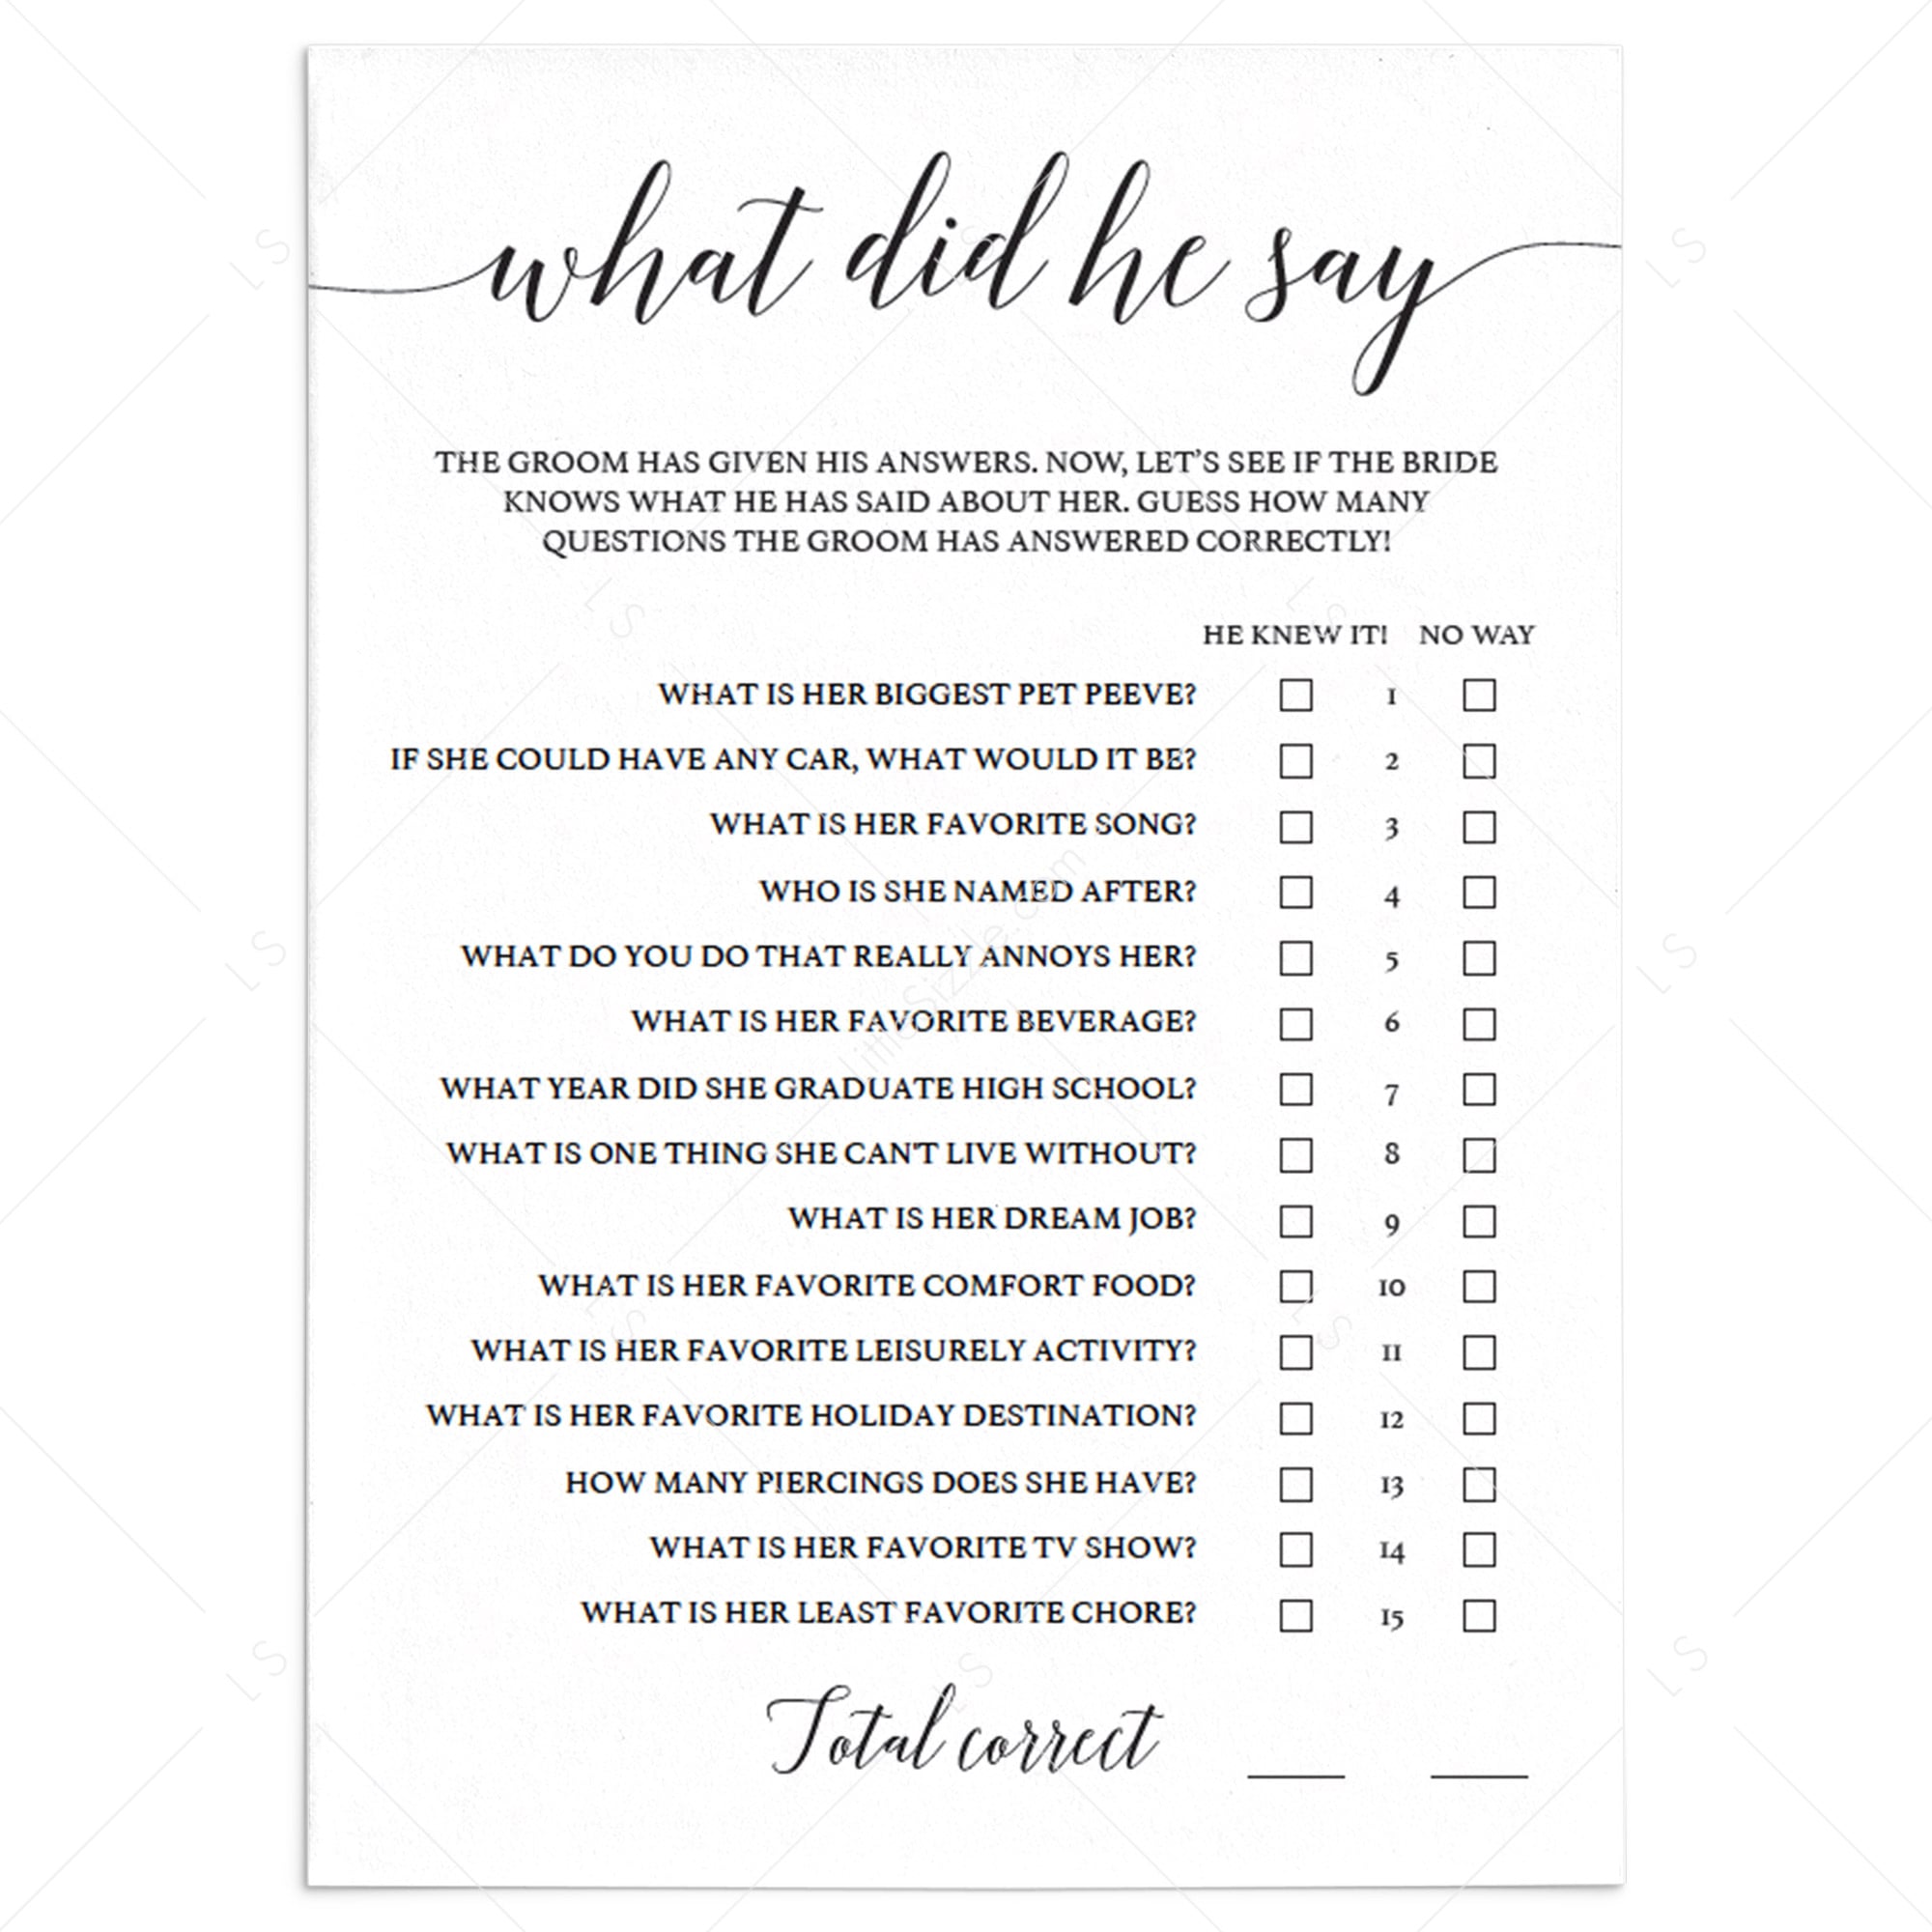 what-did-the-groom-say-bridal-shower-game-template-download